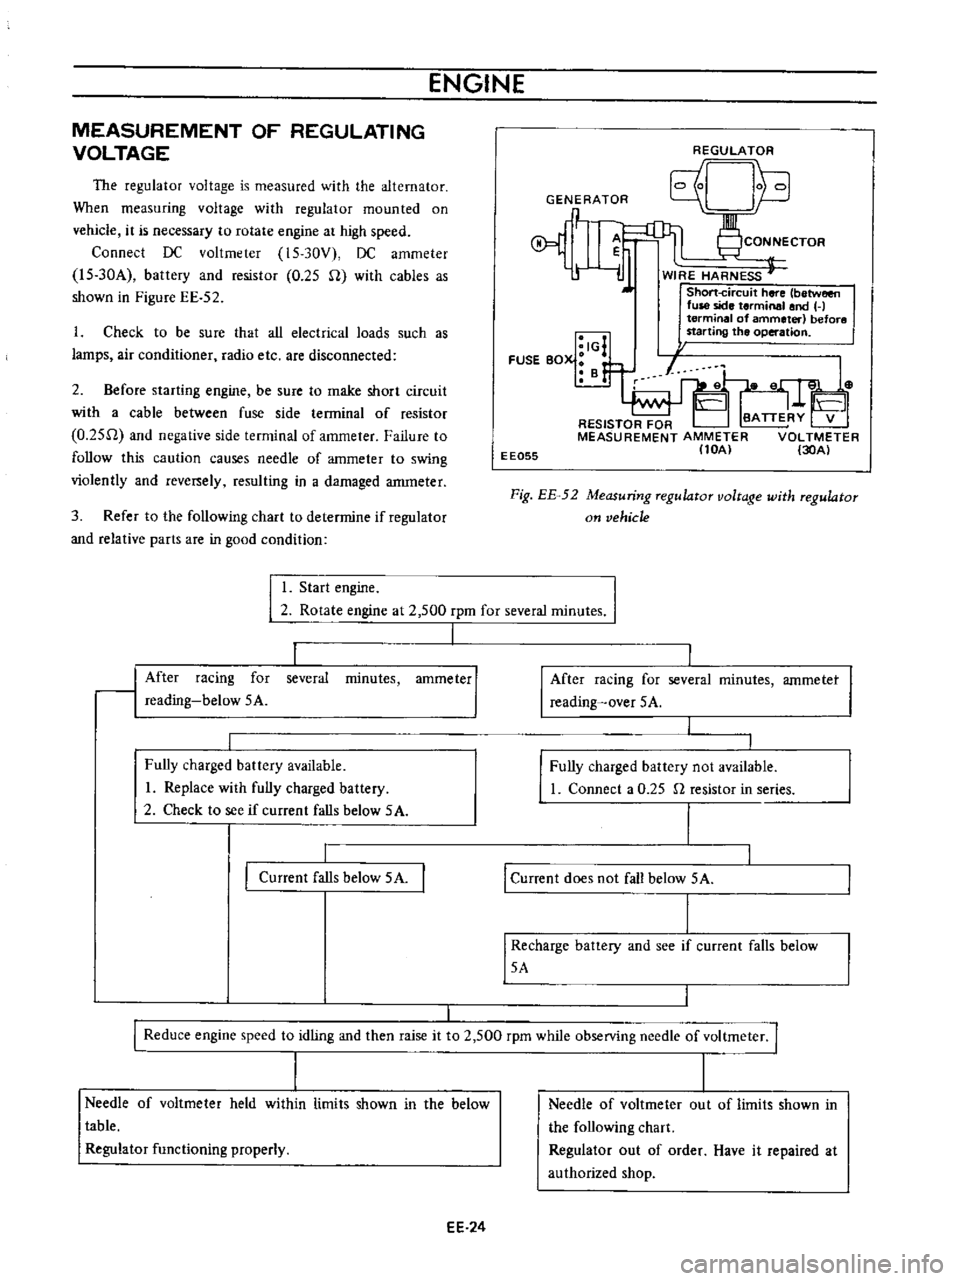 DATSUN B110 1973  Service Repair Manual 
ENGINE

MEASUREMENT 
OF

REGULATING

VOLTAGE

The

regulator 
voltage 
is 
measured 
with 
the 
alternator

When

measuring 
voltage 
with

regulator 
mounted 
on

vehicle 
it 
is

necessary 
to 
rot